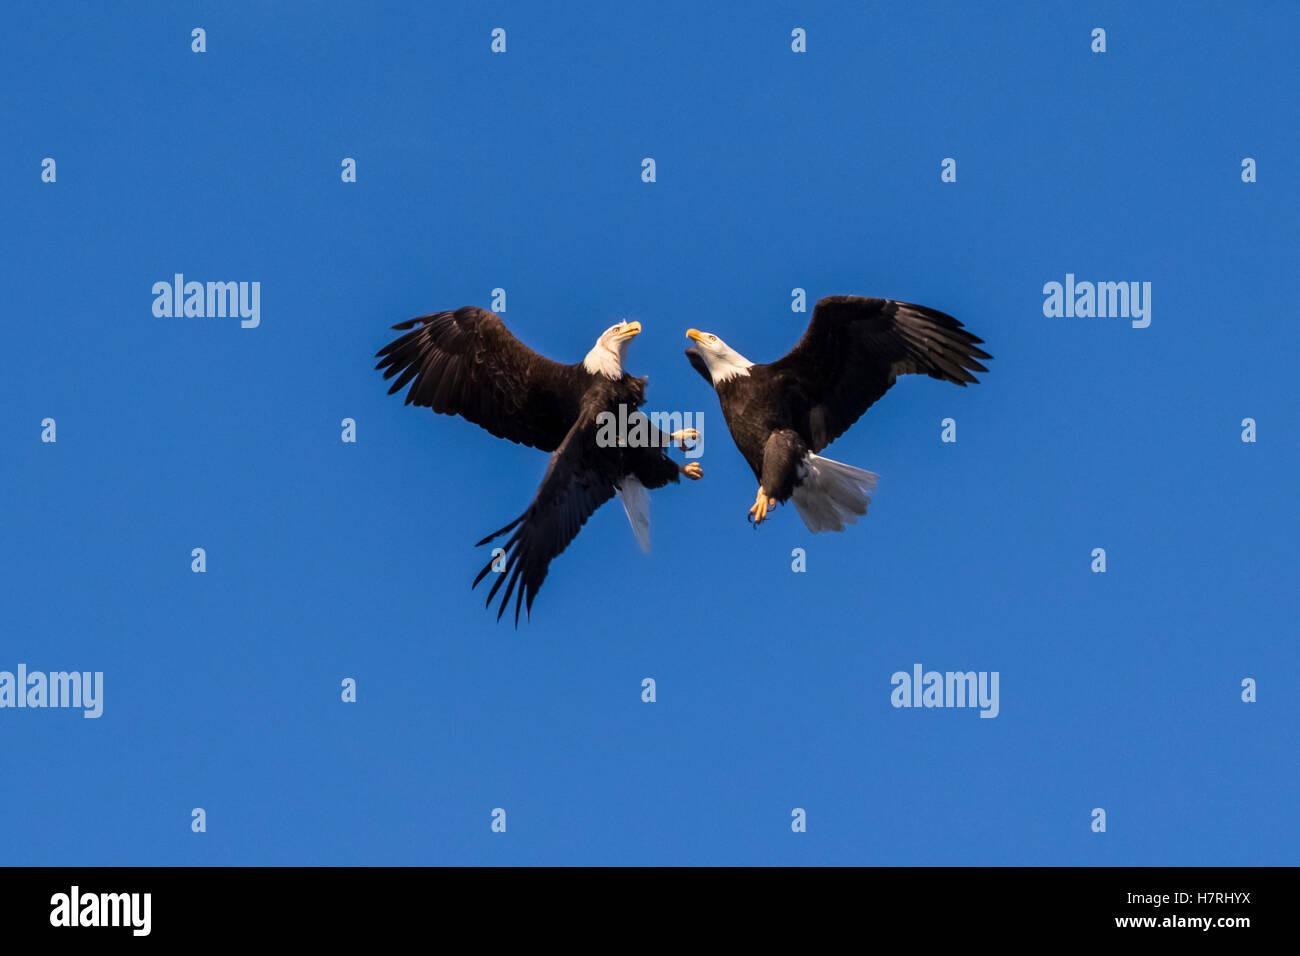 A Pair Of Bald Eagles (Haliaeetus Leucocephalus) That Are Likely Mates Do A Bonding Ritual Of Flying Together And Touching Or Locking Talons Togeth... Stock Photo